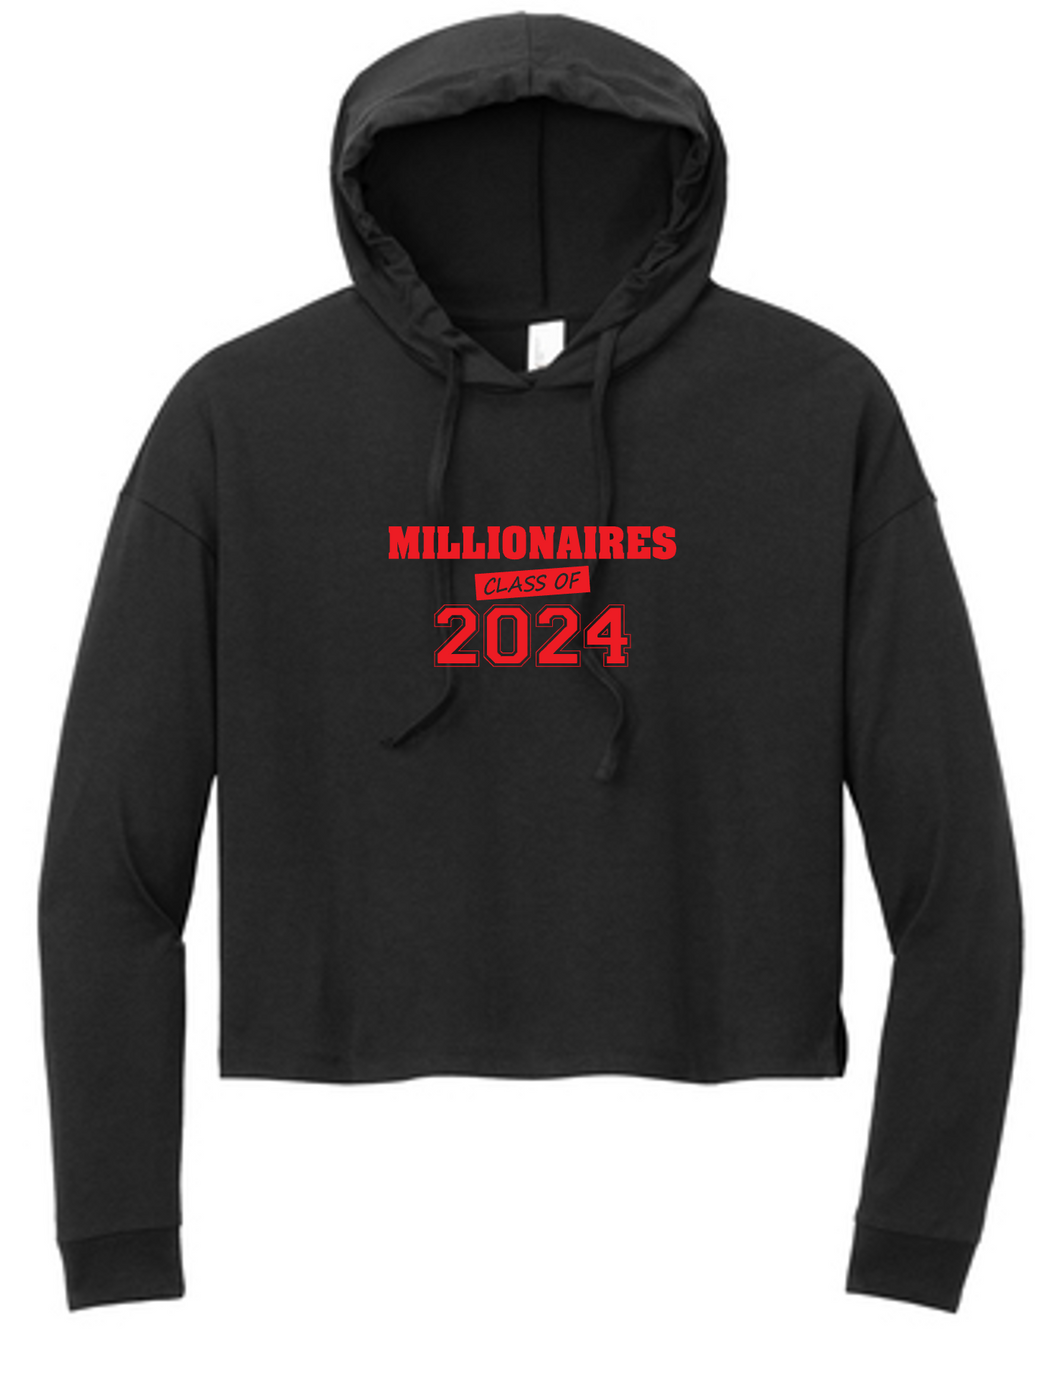 District® Women’s Perfect Tri® Midi Long Sleeve Hoodie - Millionaires Class of 2024